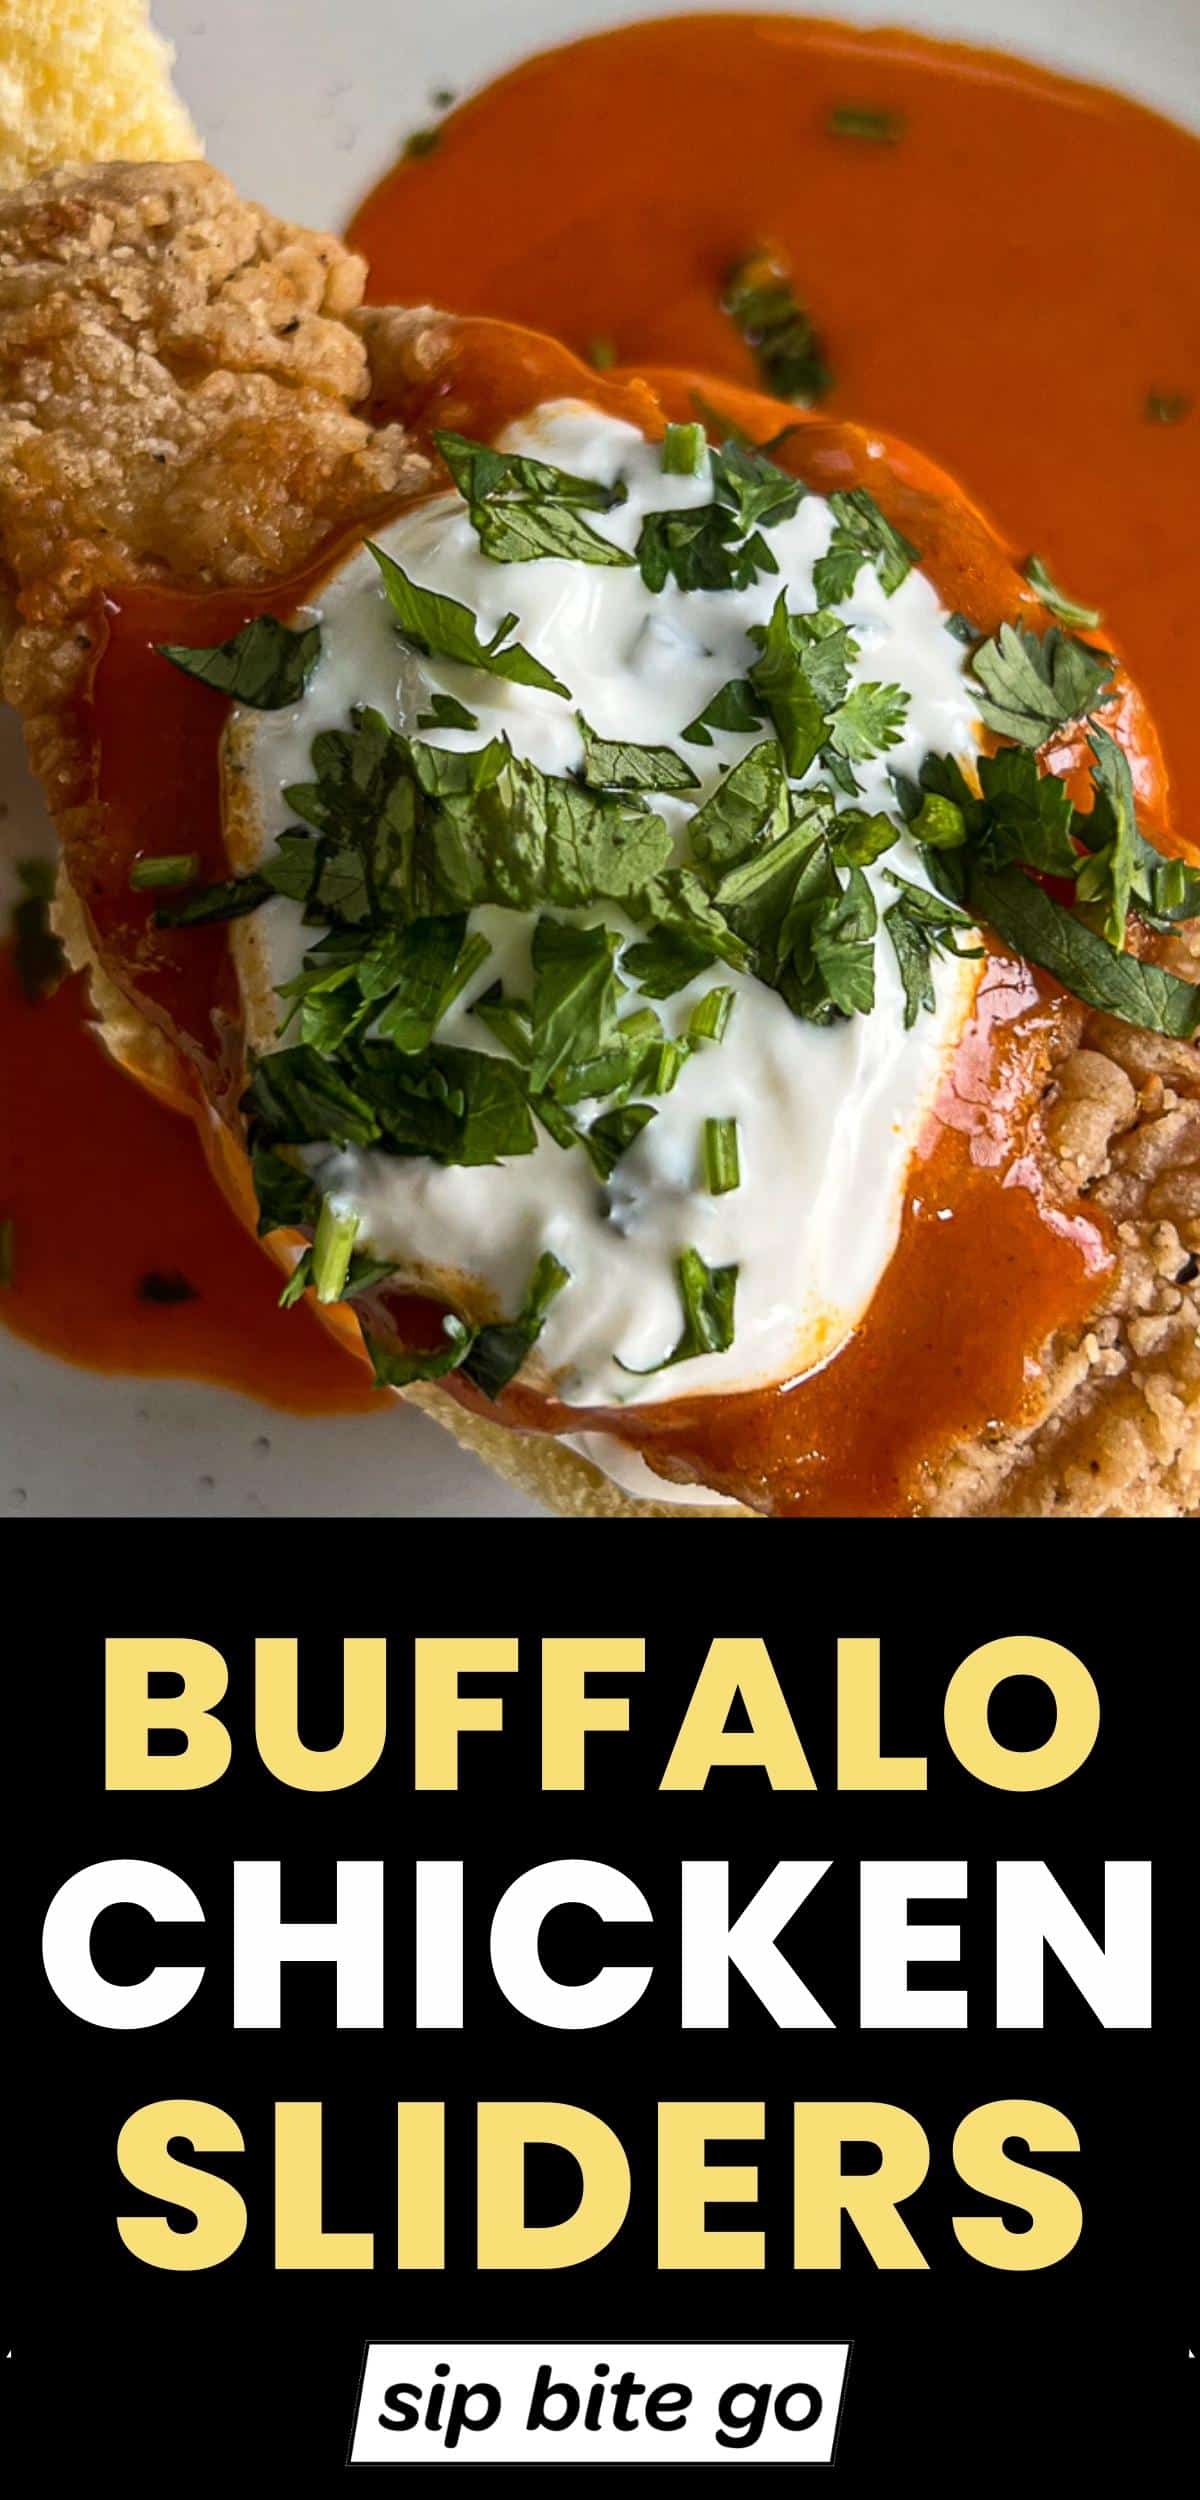 Recipe for Buffalo Chicken Sliders with text overlay and Sip Bite Go logo